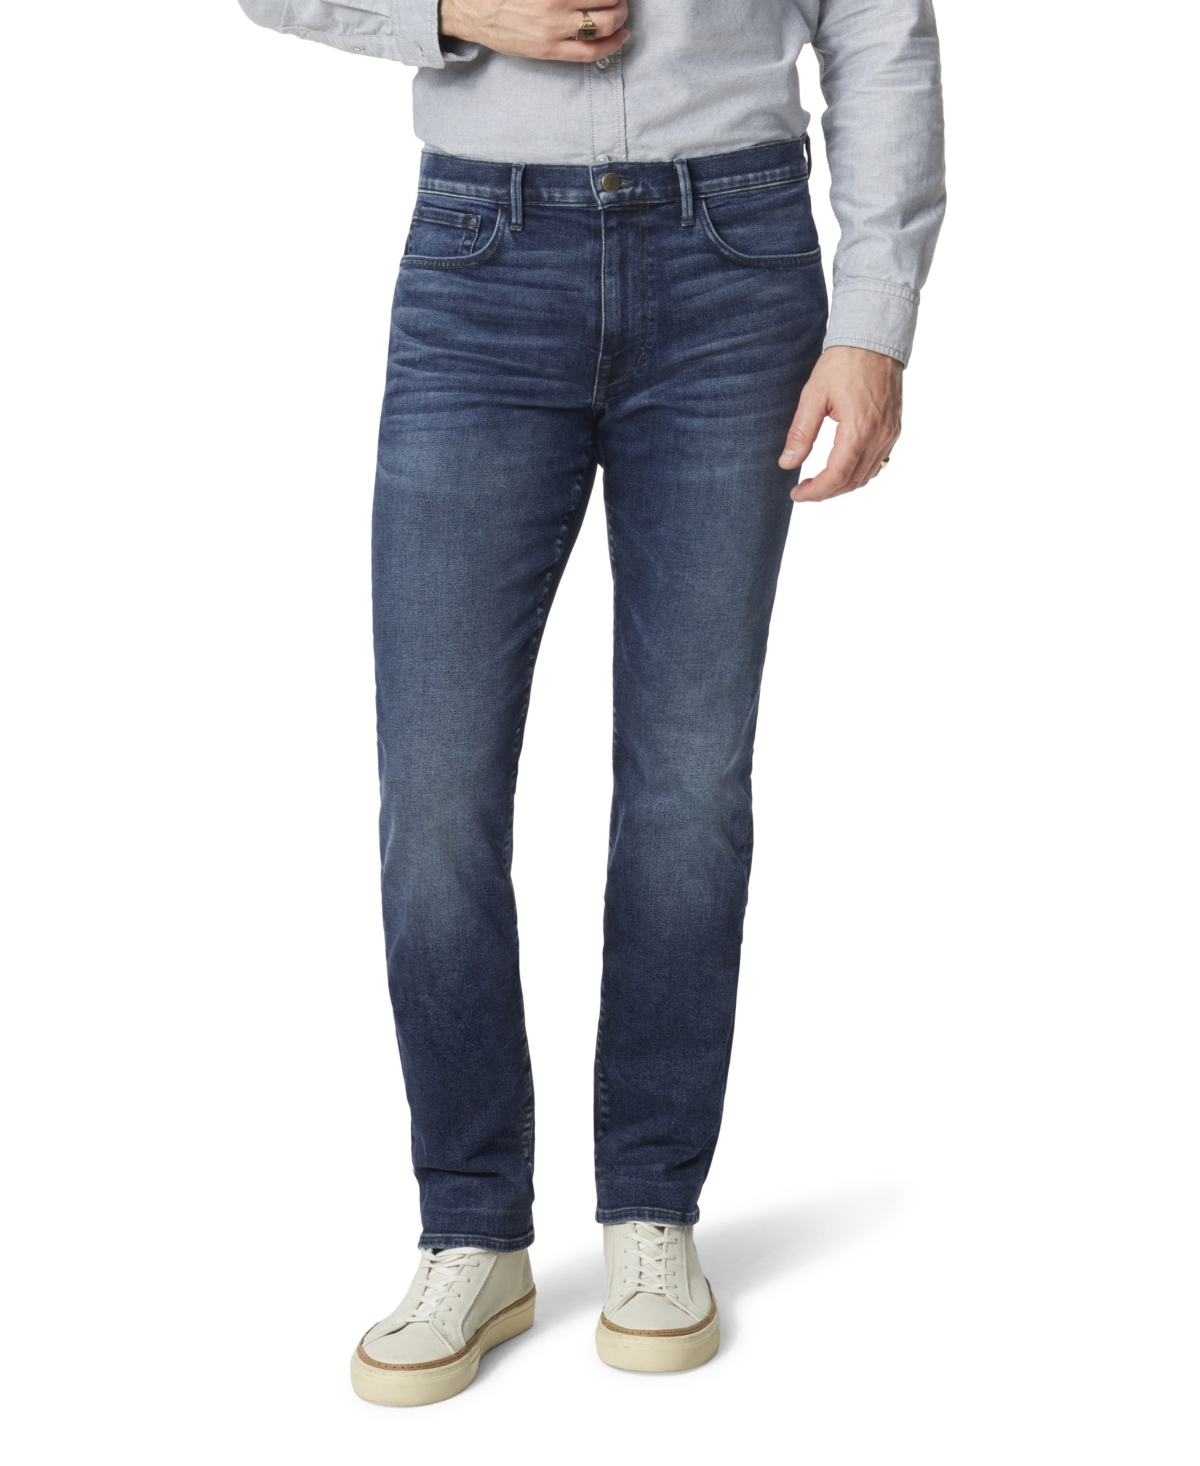 Men's The Asher Slim Fit Stretch Jeans - Riplen